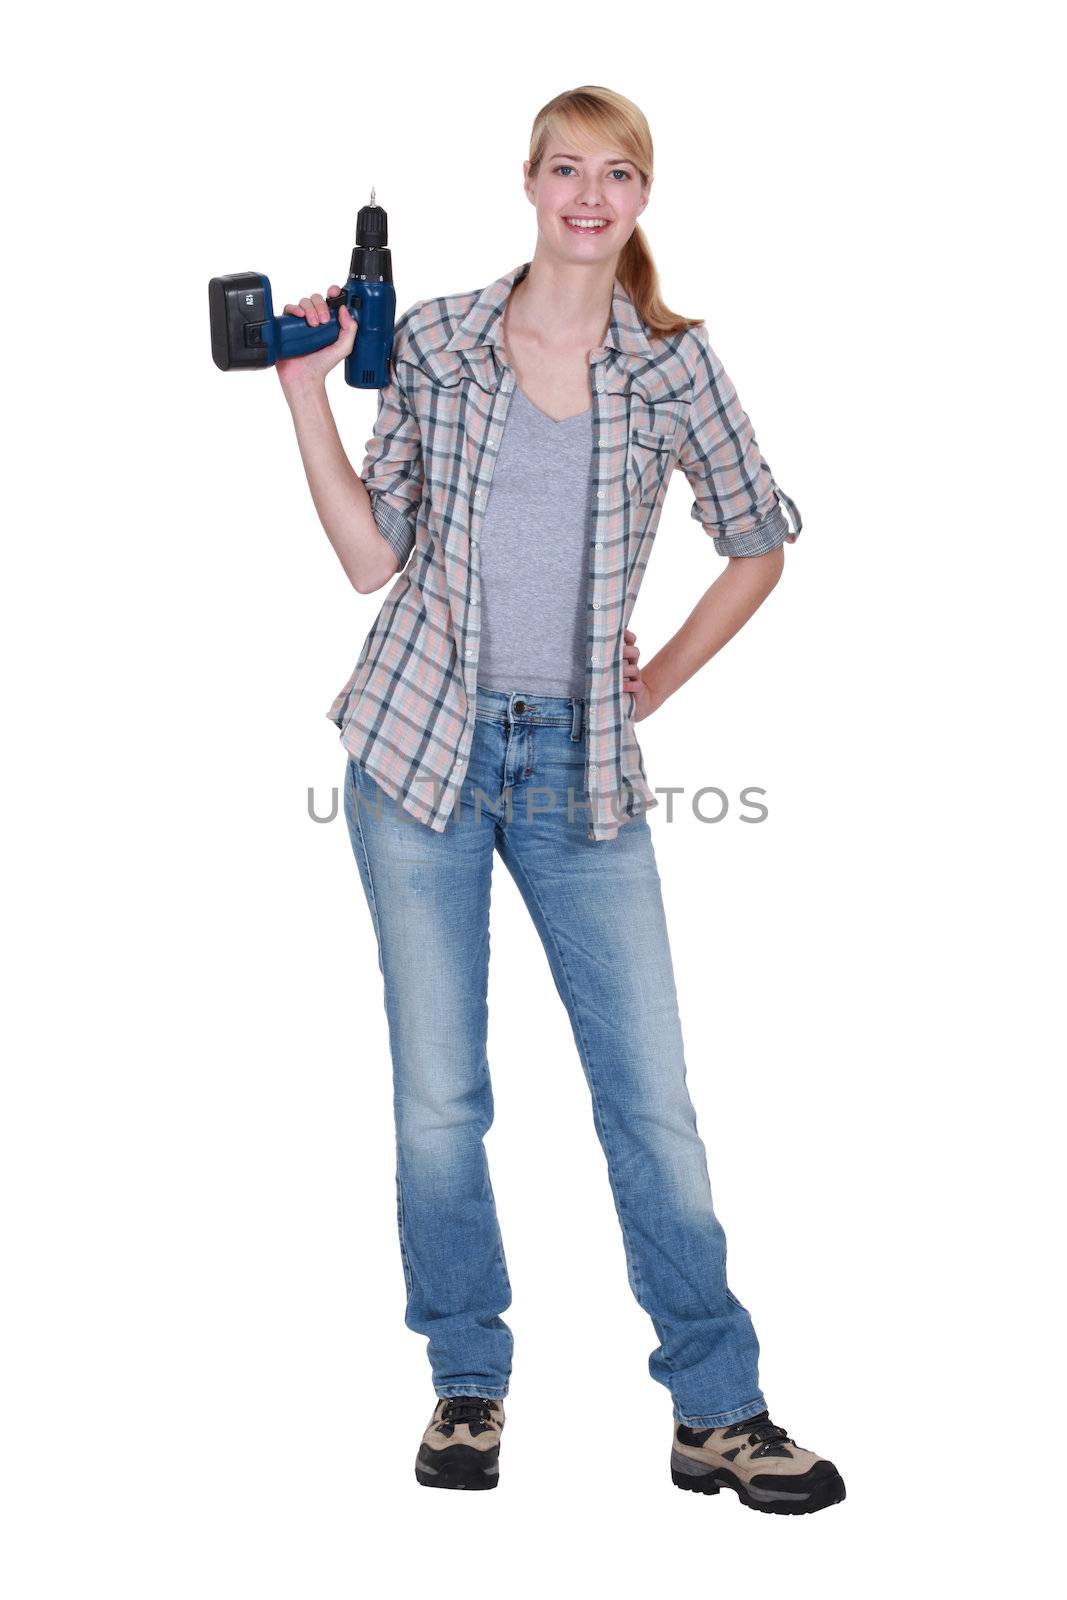 Blond woman stood with power drill